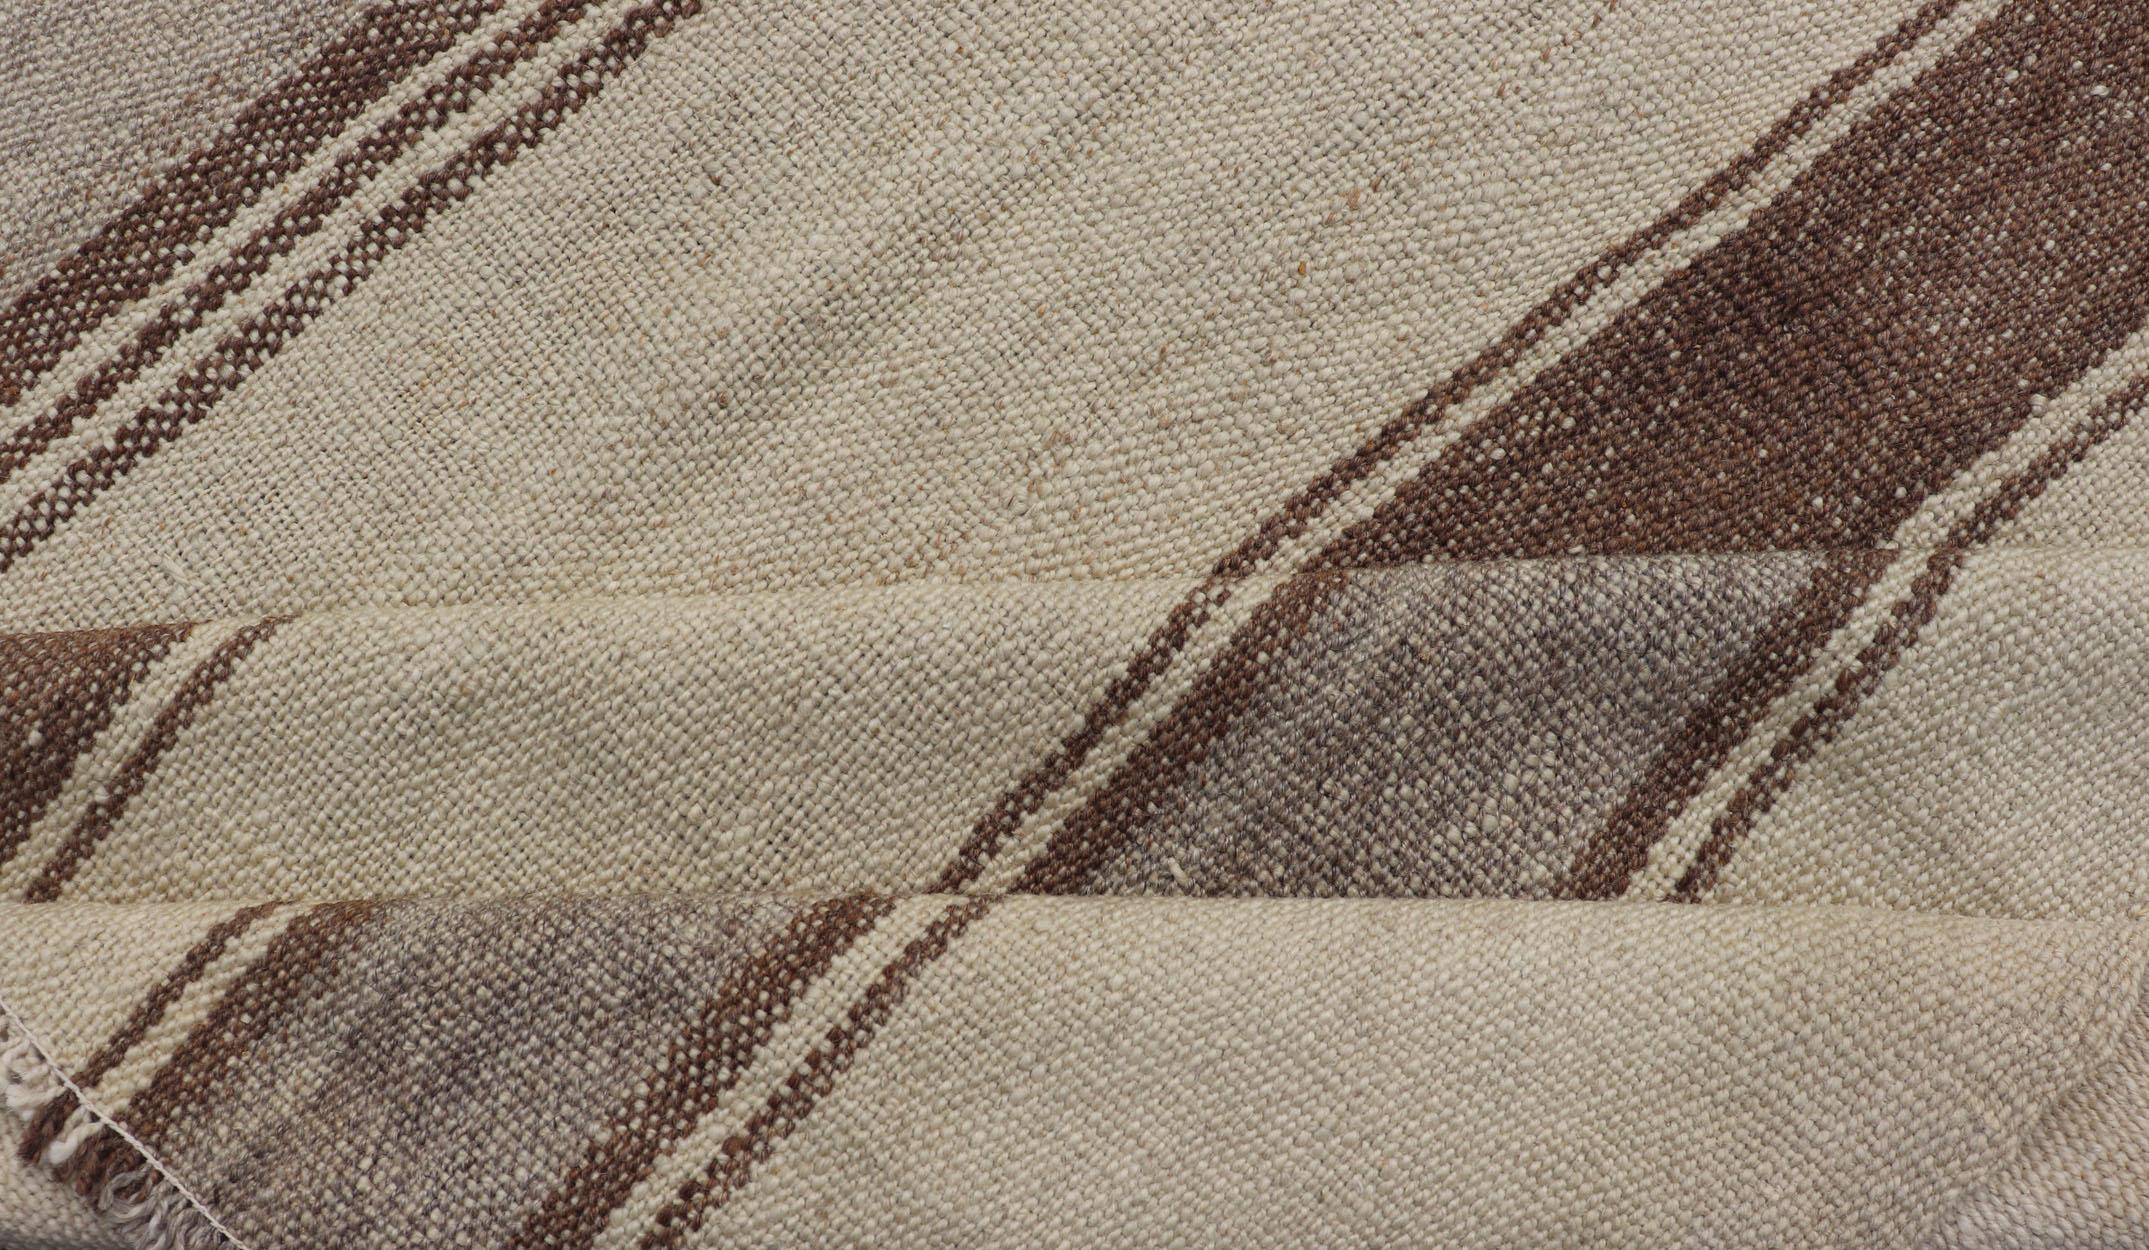 Vintage Turkish Kilim with Vertical Stripes in Tan, Taupe, Grey, Cream and Brown For Sale 4